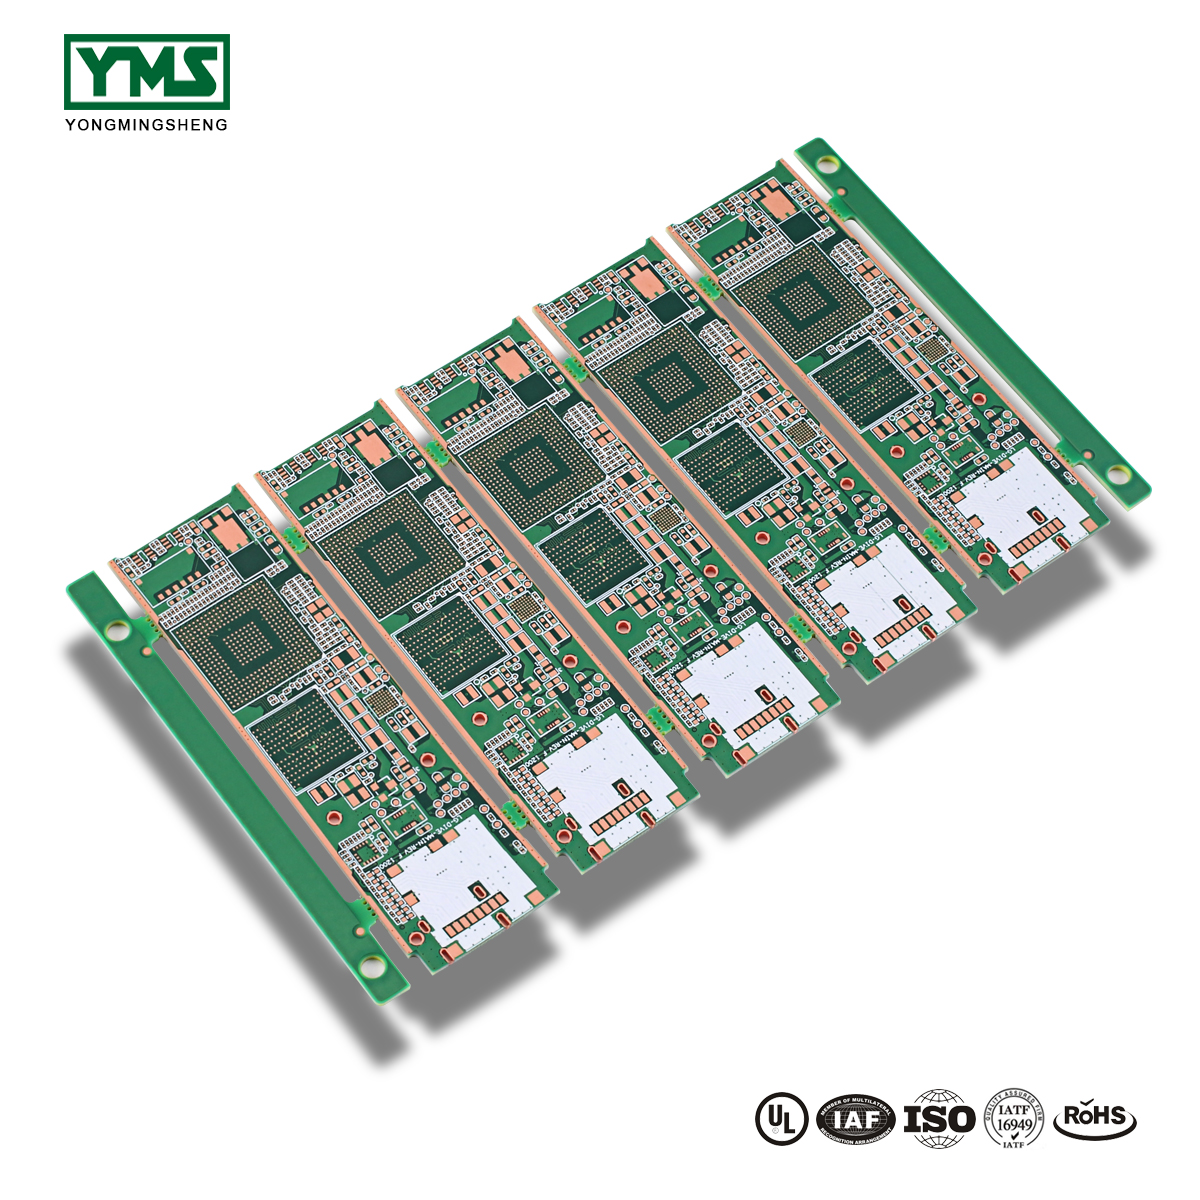 Best Price onImmersion Silver Flex-Rigid Pcb - 12Layer Immersion Gold HDI | YMS PCB – Yongmingsheng